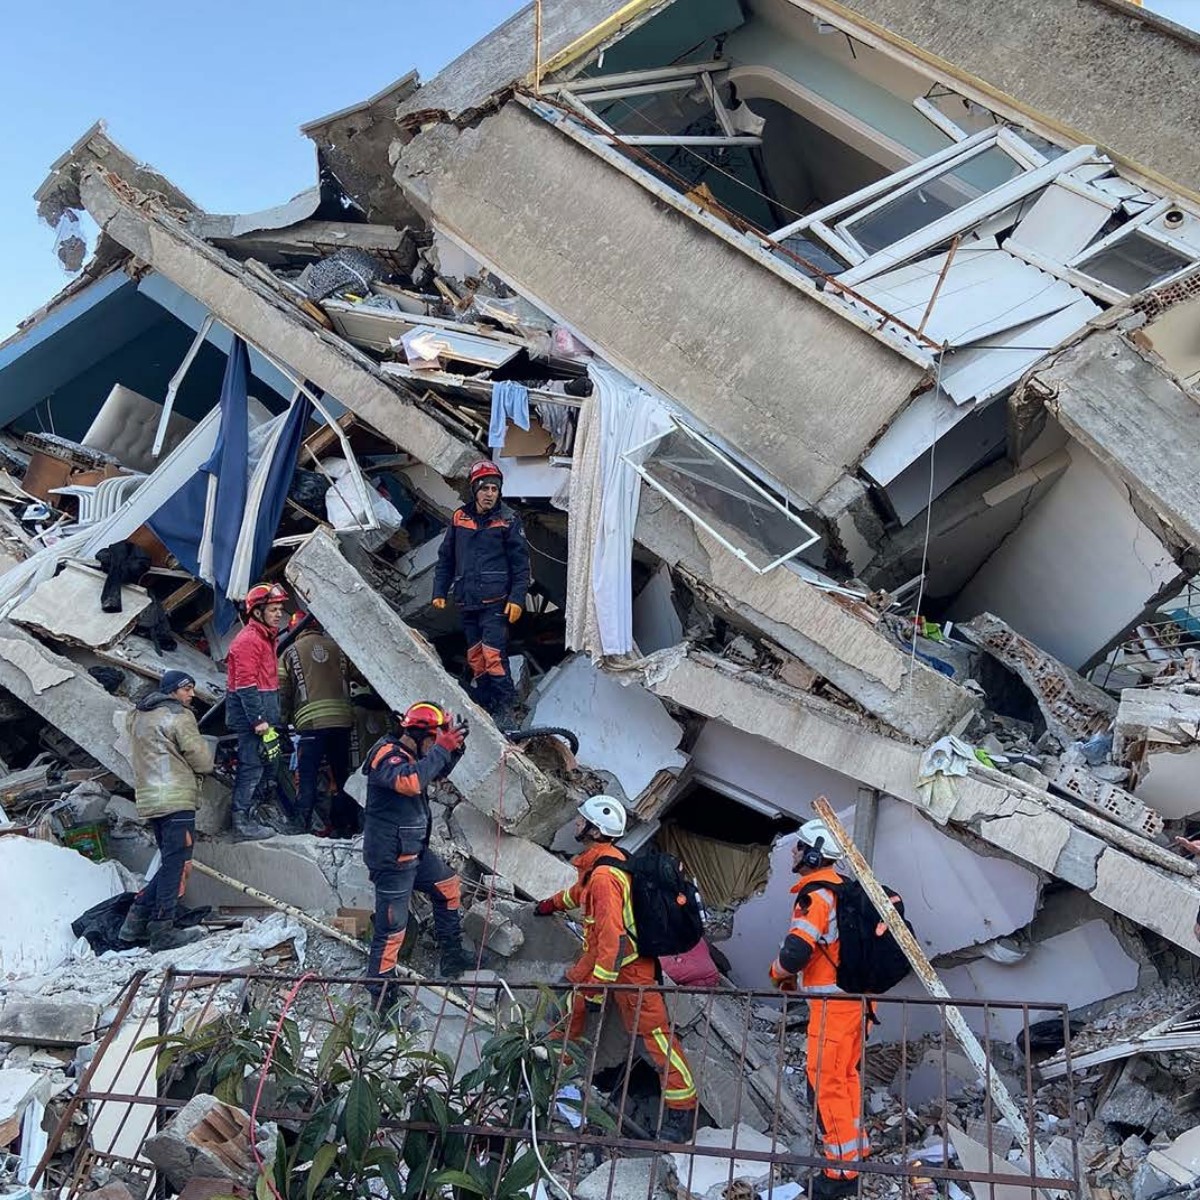 Türkiye: Rubble of corruption fuels earthquake devastation*Luavut Zahid speaks to Burcak Basbug, Academic Director of ICPEM, about the situation in Türkiye, where thousands have been injured, and countless displaced by the quake